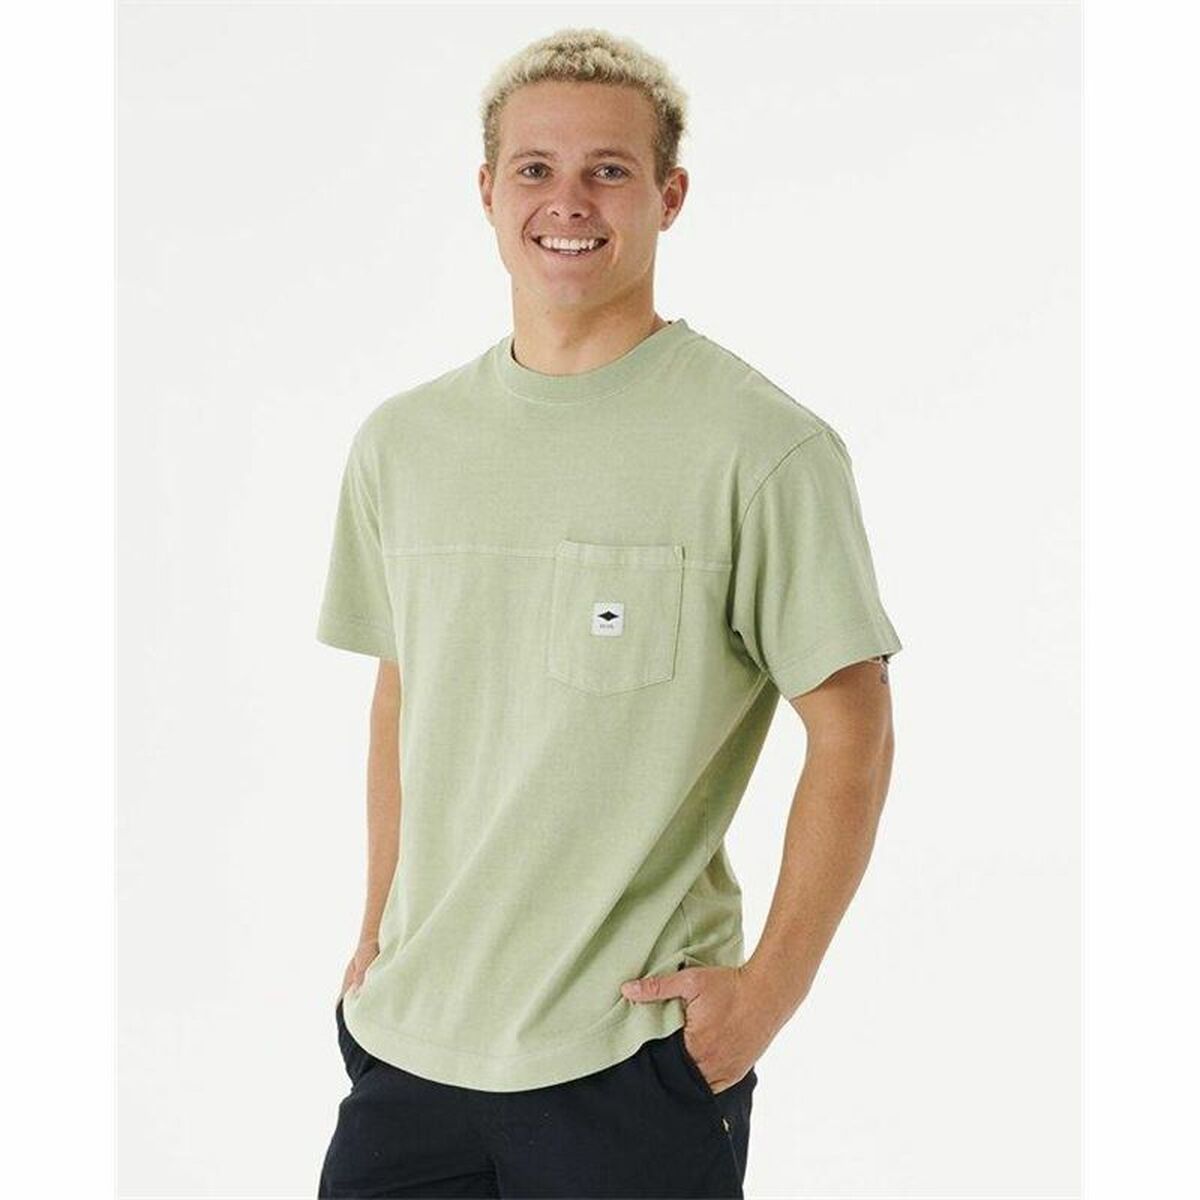 T-shirt Rip Curl Quality Surf Products Green Men